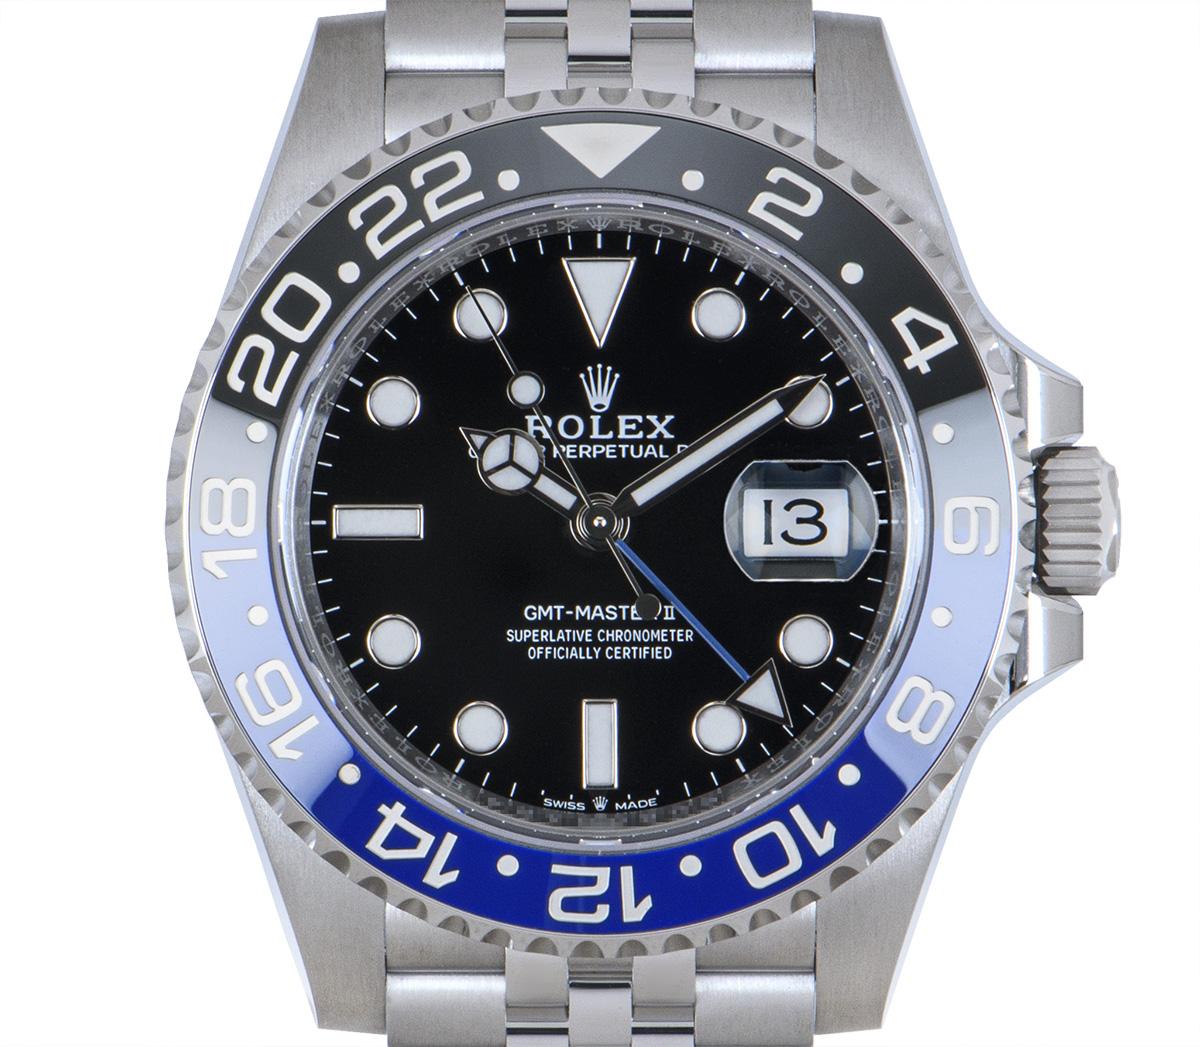 A GMT-Master II Batgirl in Oystersteel by Rolex. Featuring a black dial with the date and a blue second time zone hand. The ceramic blue and black bidirectional rotatable bezel features a graduated 24-hour display.

The 126710BLNR was originally